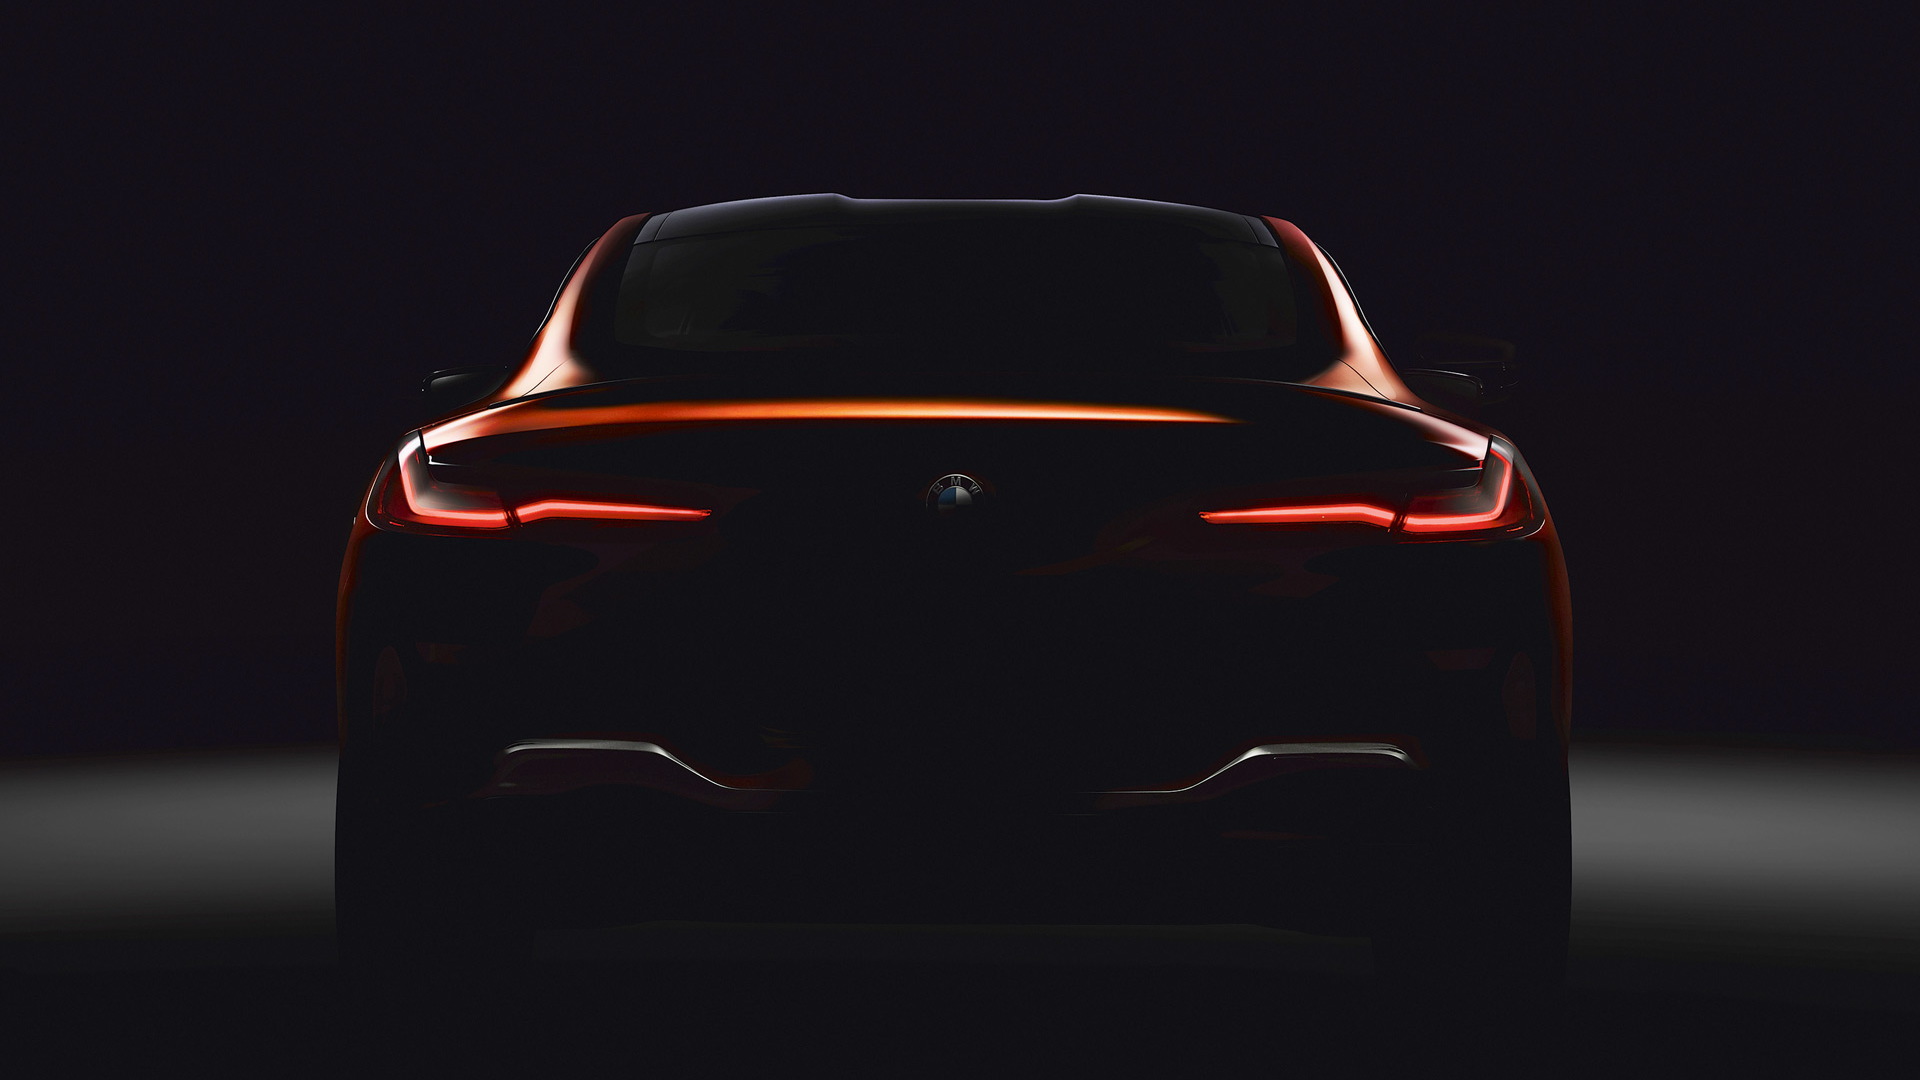 Teaser for BMW 8-Series debuting at 2018 24 Hours of Le Mans